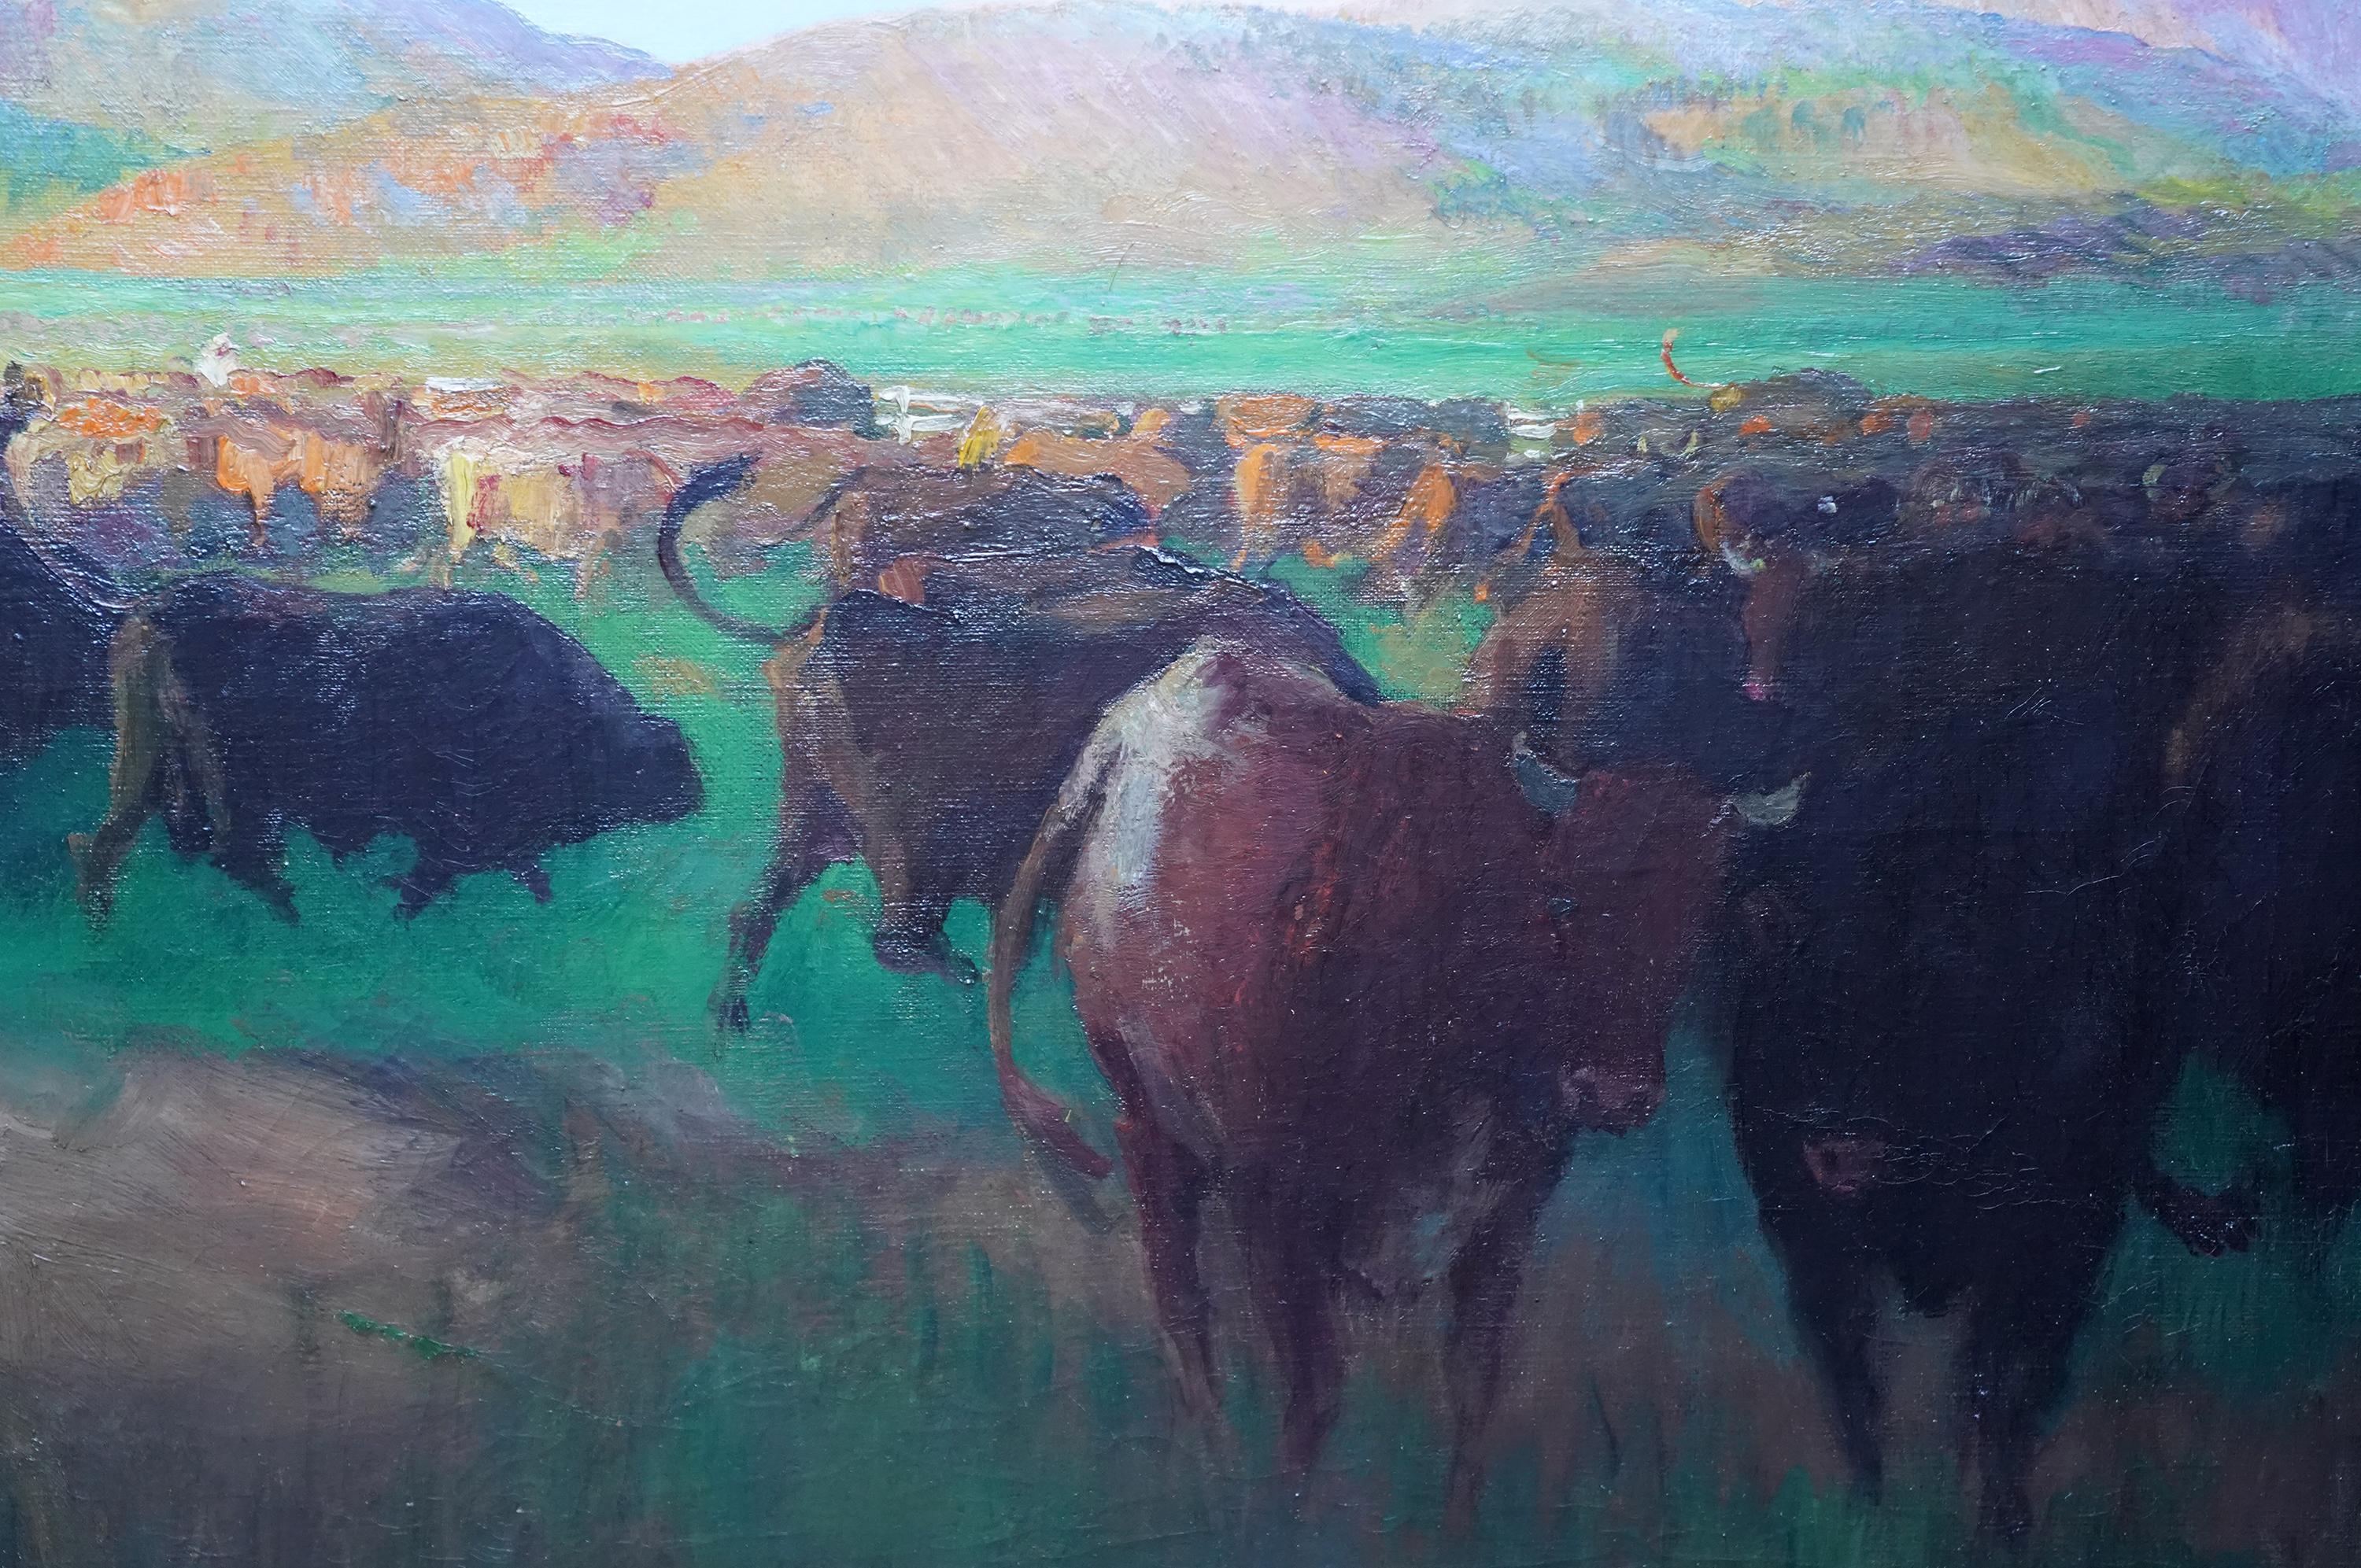 This superb vibrant Post Impressionist African landscape oil painting is by noted British artist Gerald Spencer Pryse. It was painted about 1925 when Pryse was visiting Morocco and Northern Africa. In the fore and middle ground are grazing cattle.